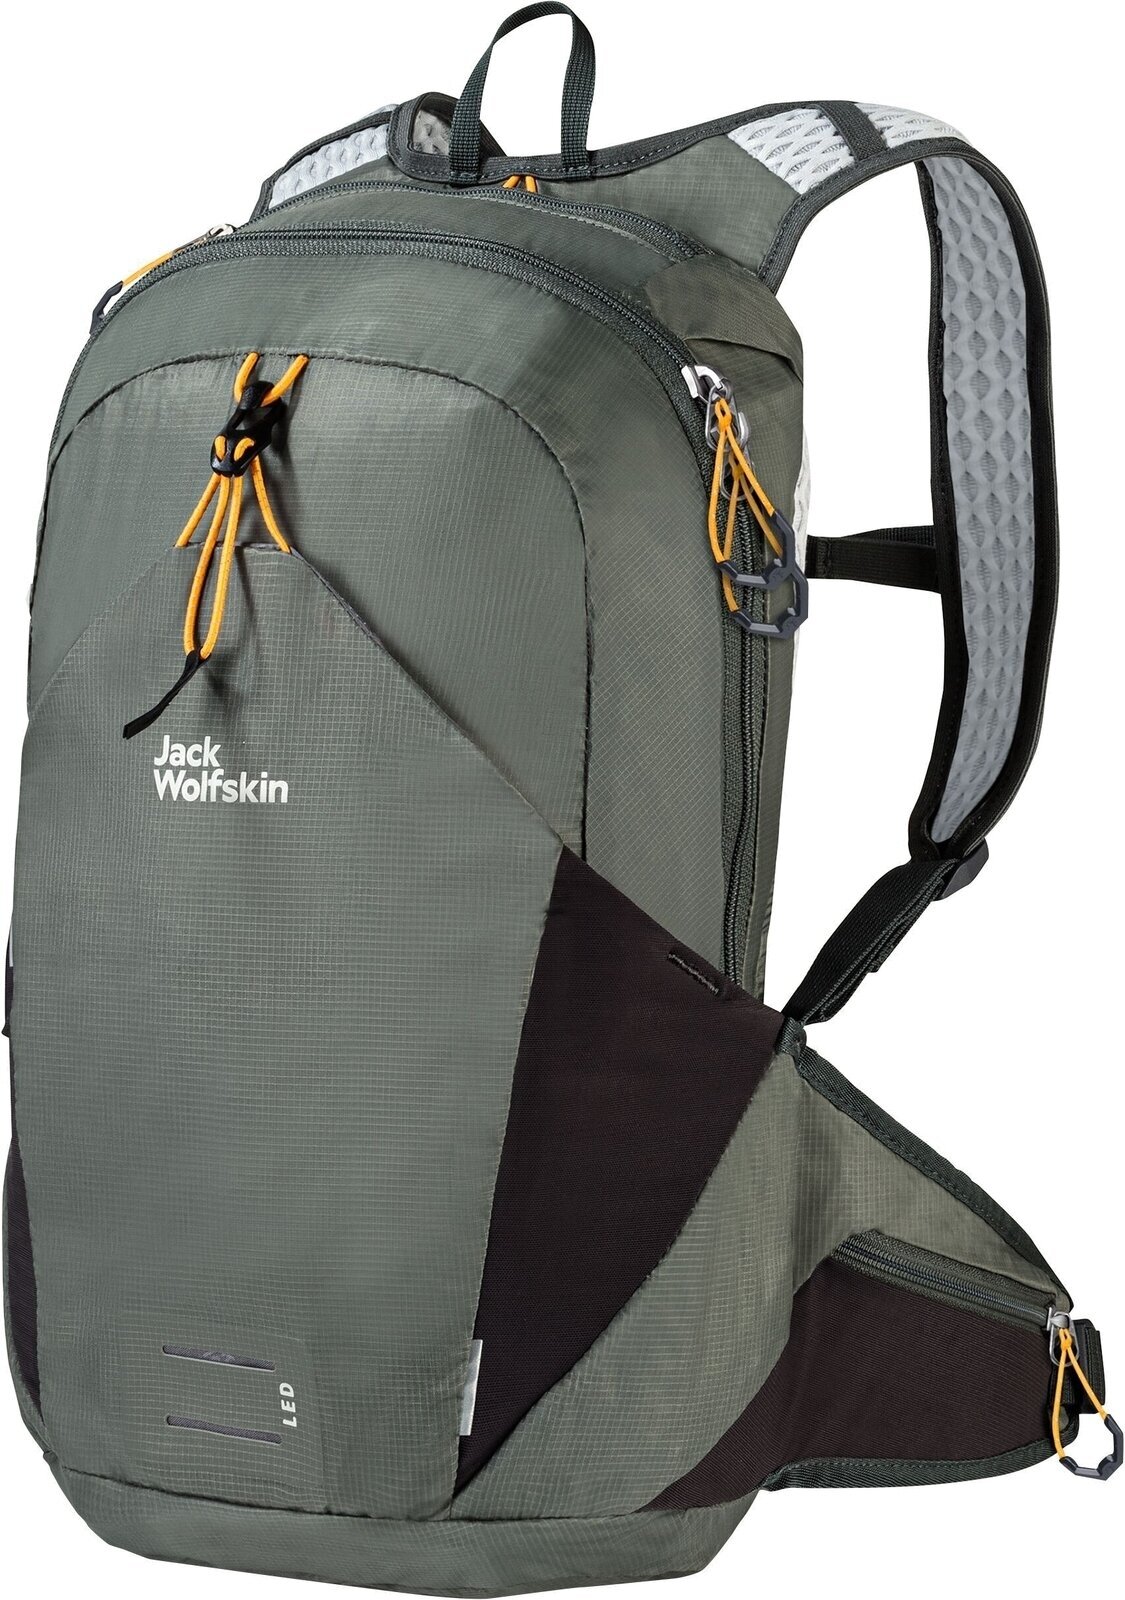 Outdoor Backpack Jack Wolfskin Moab Jam 16 Gecko Green One Size Outdoor Backpack